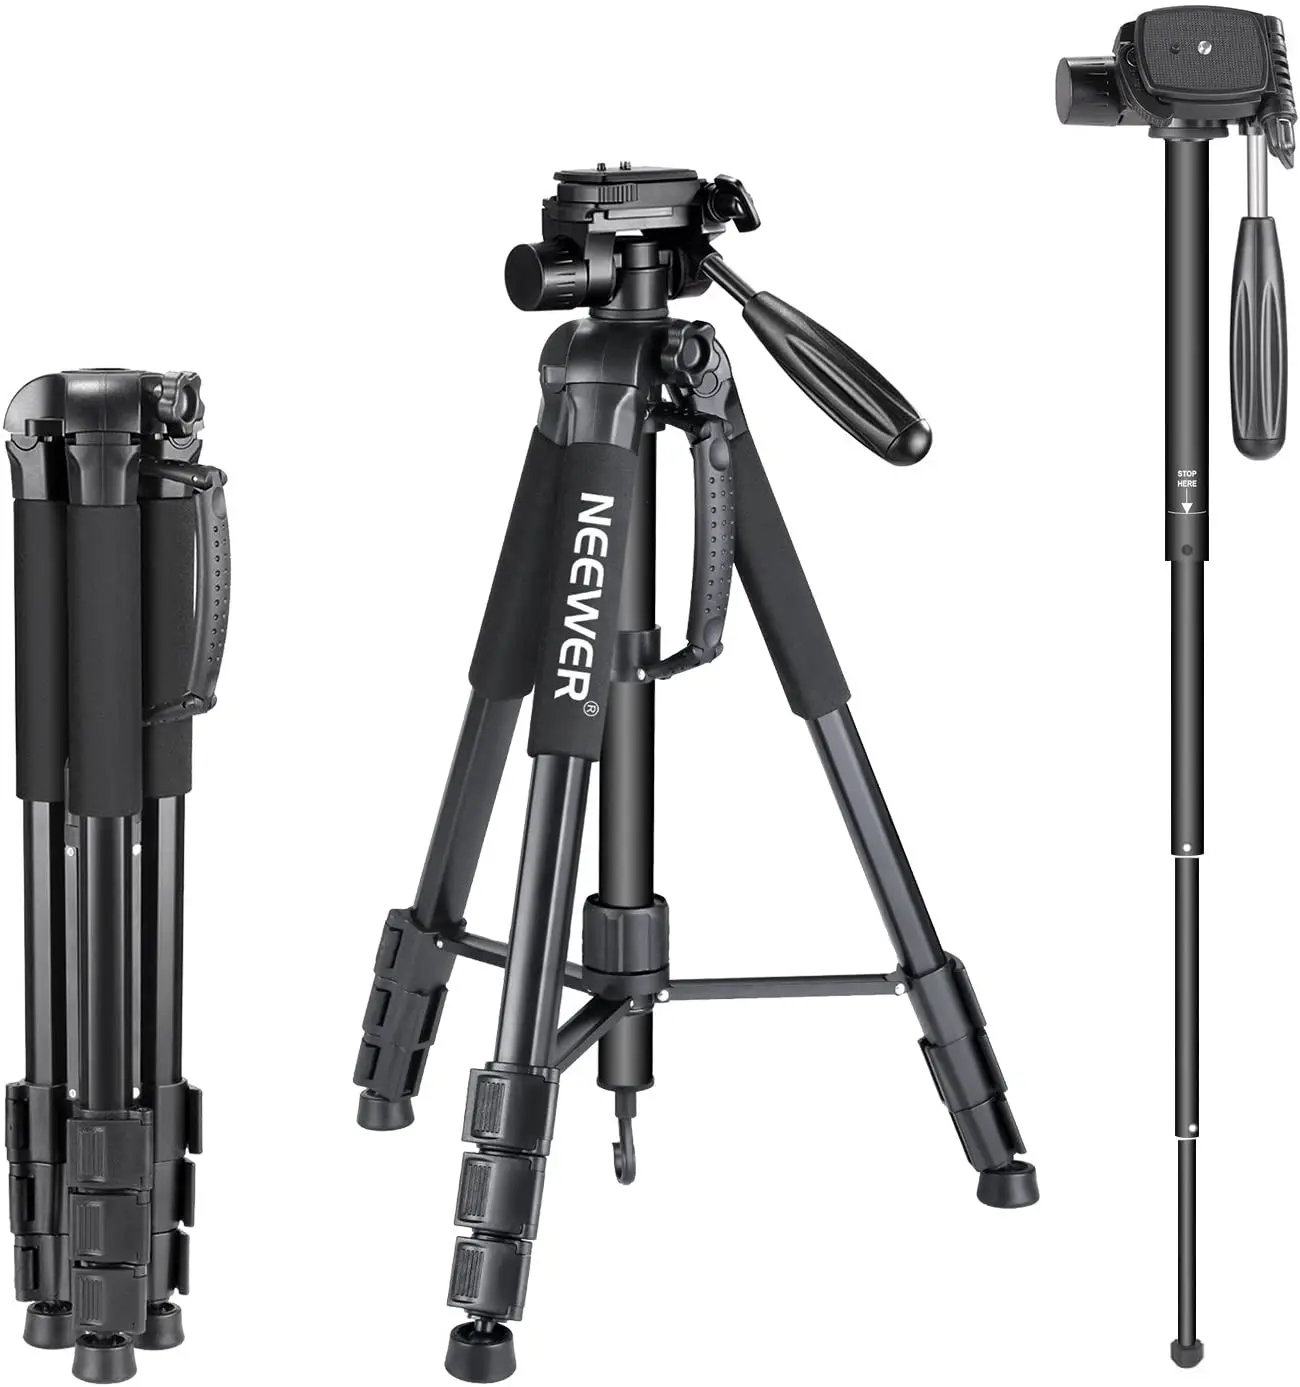 

Neewer Portable 70 inches/177 centimeters Aluminium Alloy Camera Tripod Monopod with 3-Way Swivel Pan Head,Bag for DSLR